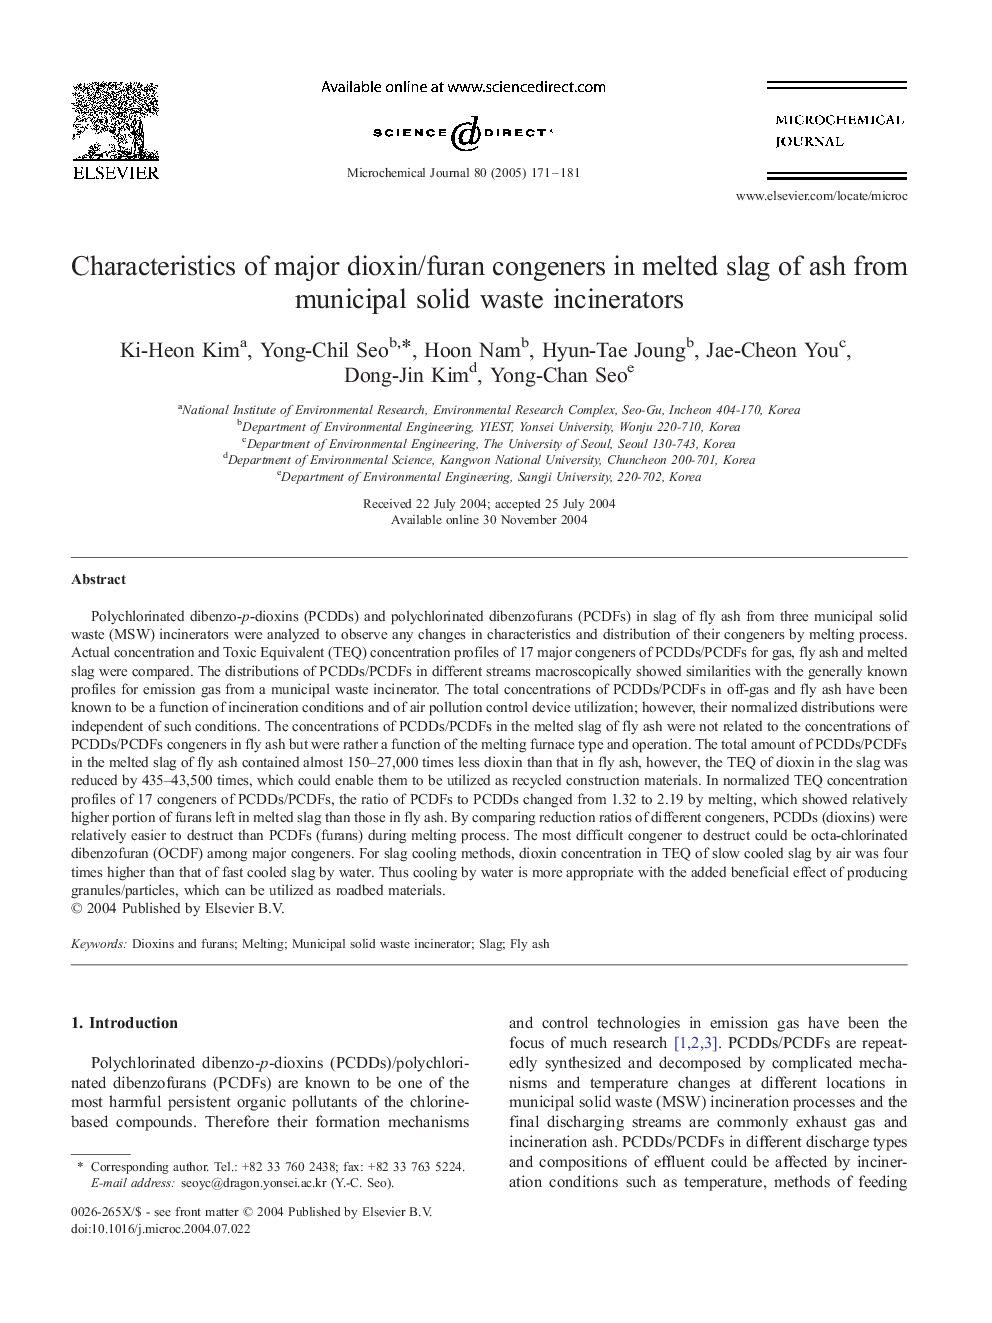 Characteristics of major dioxin/furan congeners in melted slag of ash from municipal solid waste incinerators